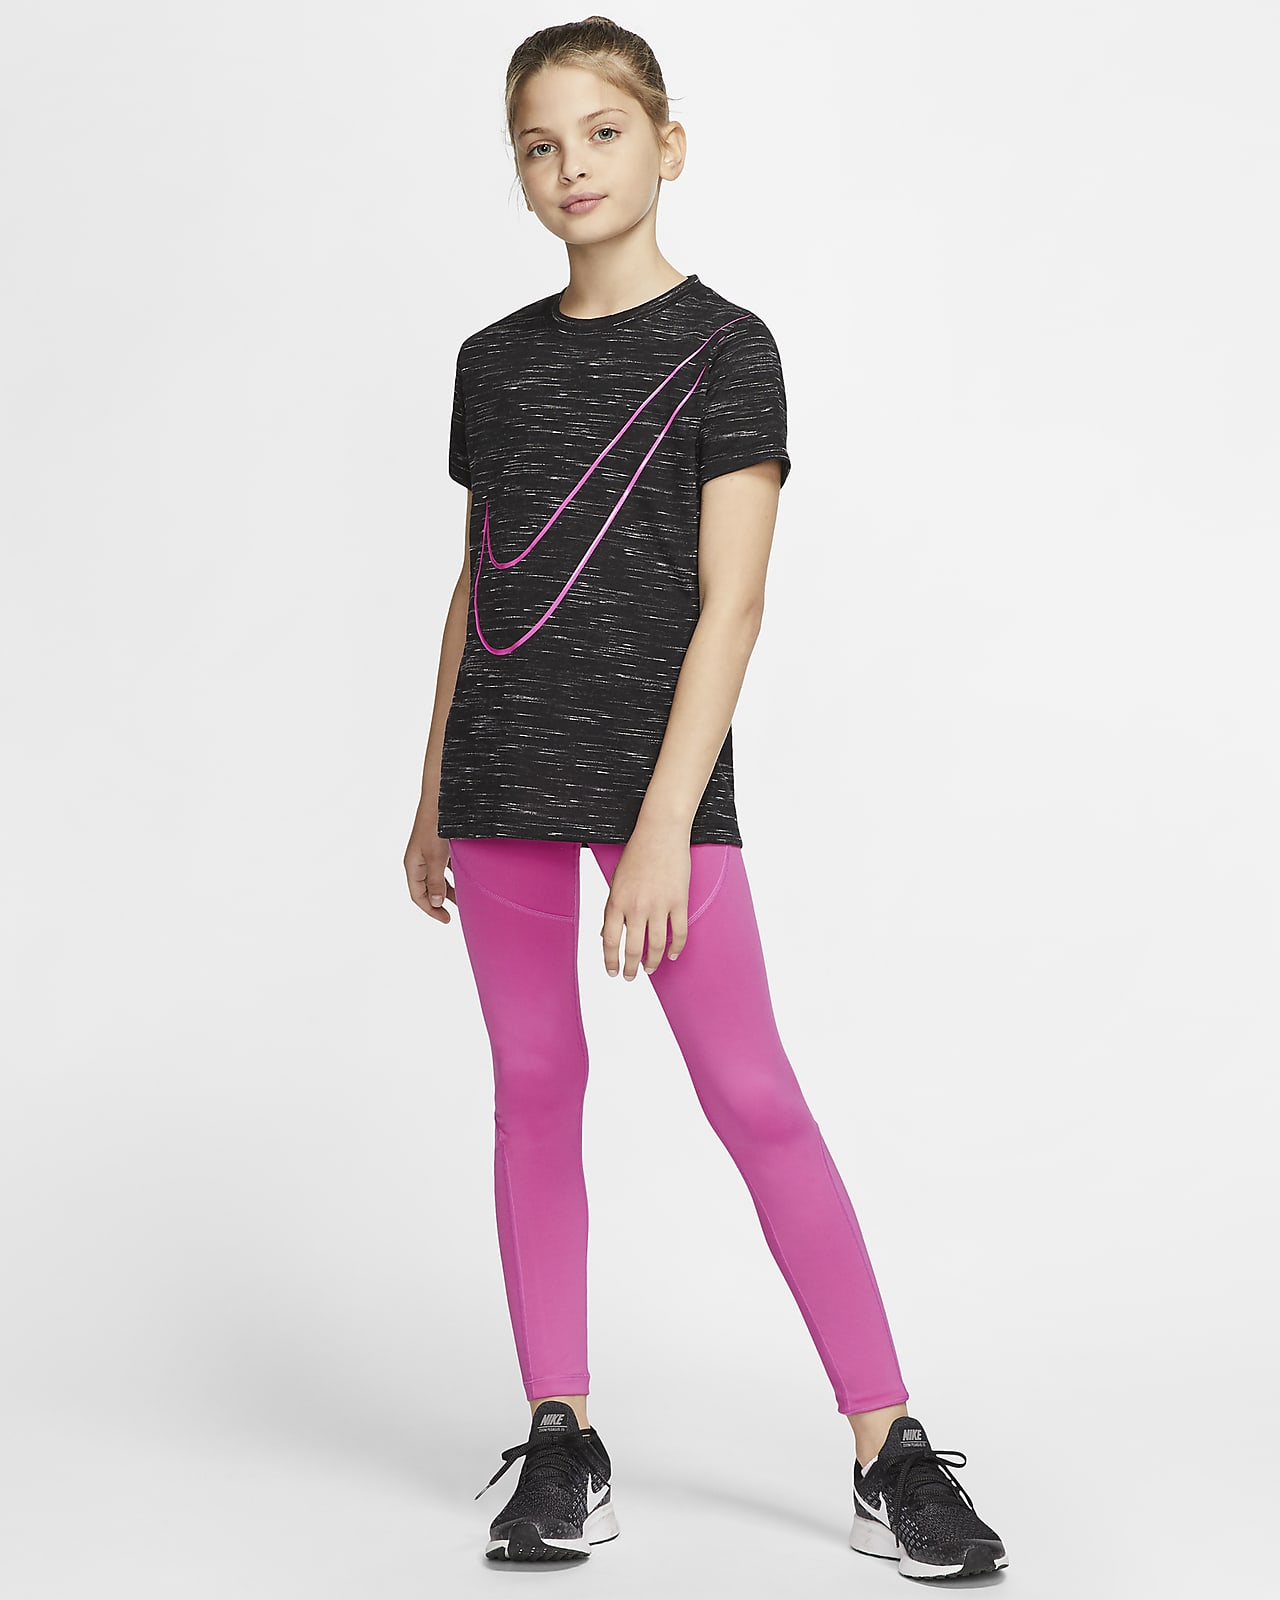 nike fit for girls